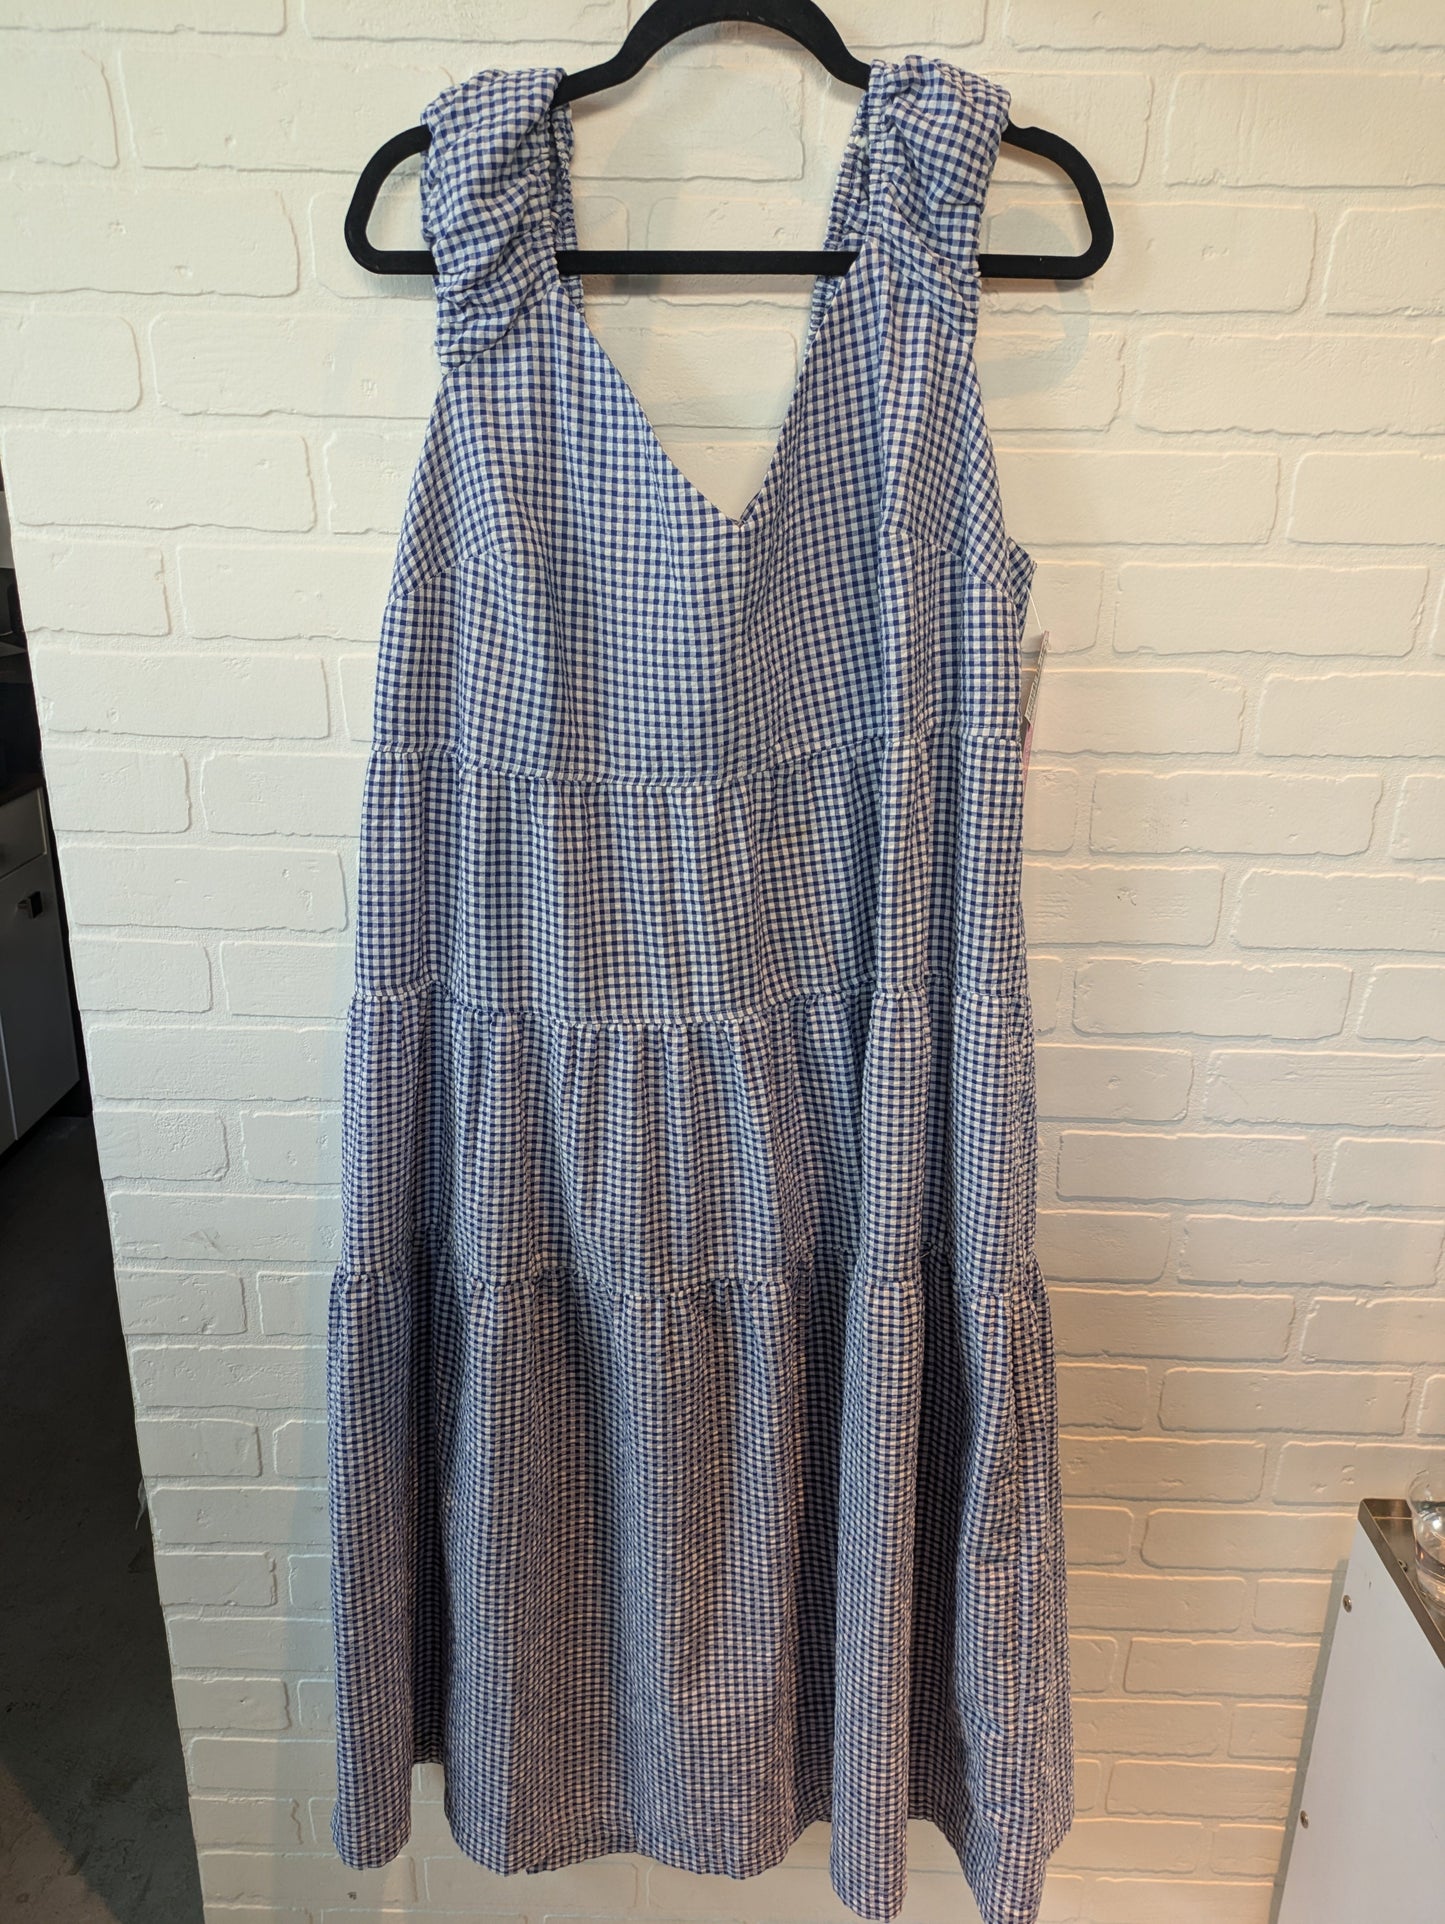 Blue & White Dress Casual Midi Old Navy, Size 2x